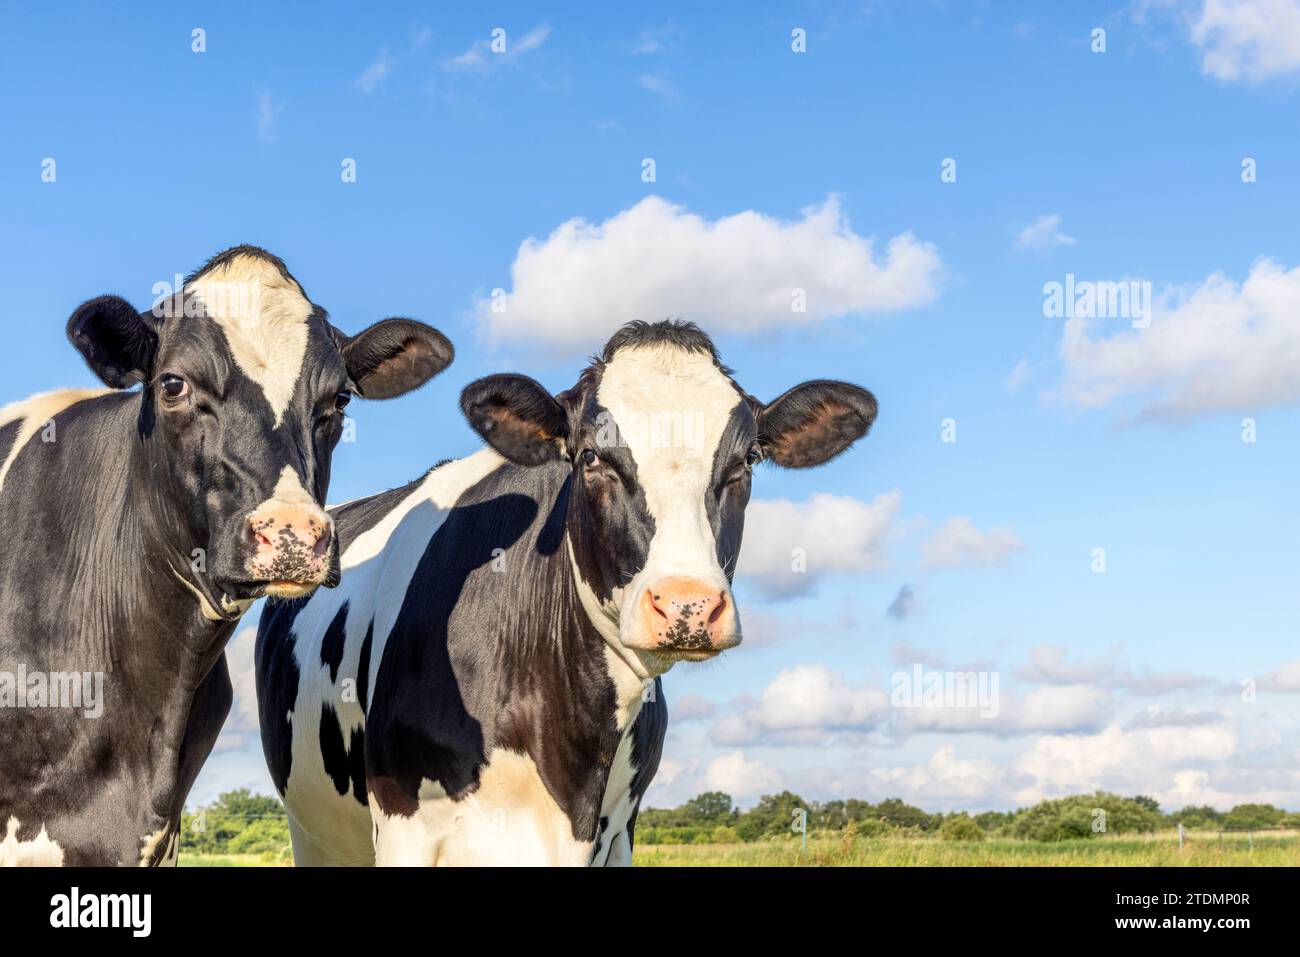 Two cows heads side by side, tender portrait of two cow lovingly together, with dreamy eyes, black and white with cloudy blue sky background Stock Photo